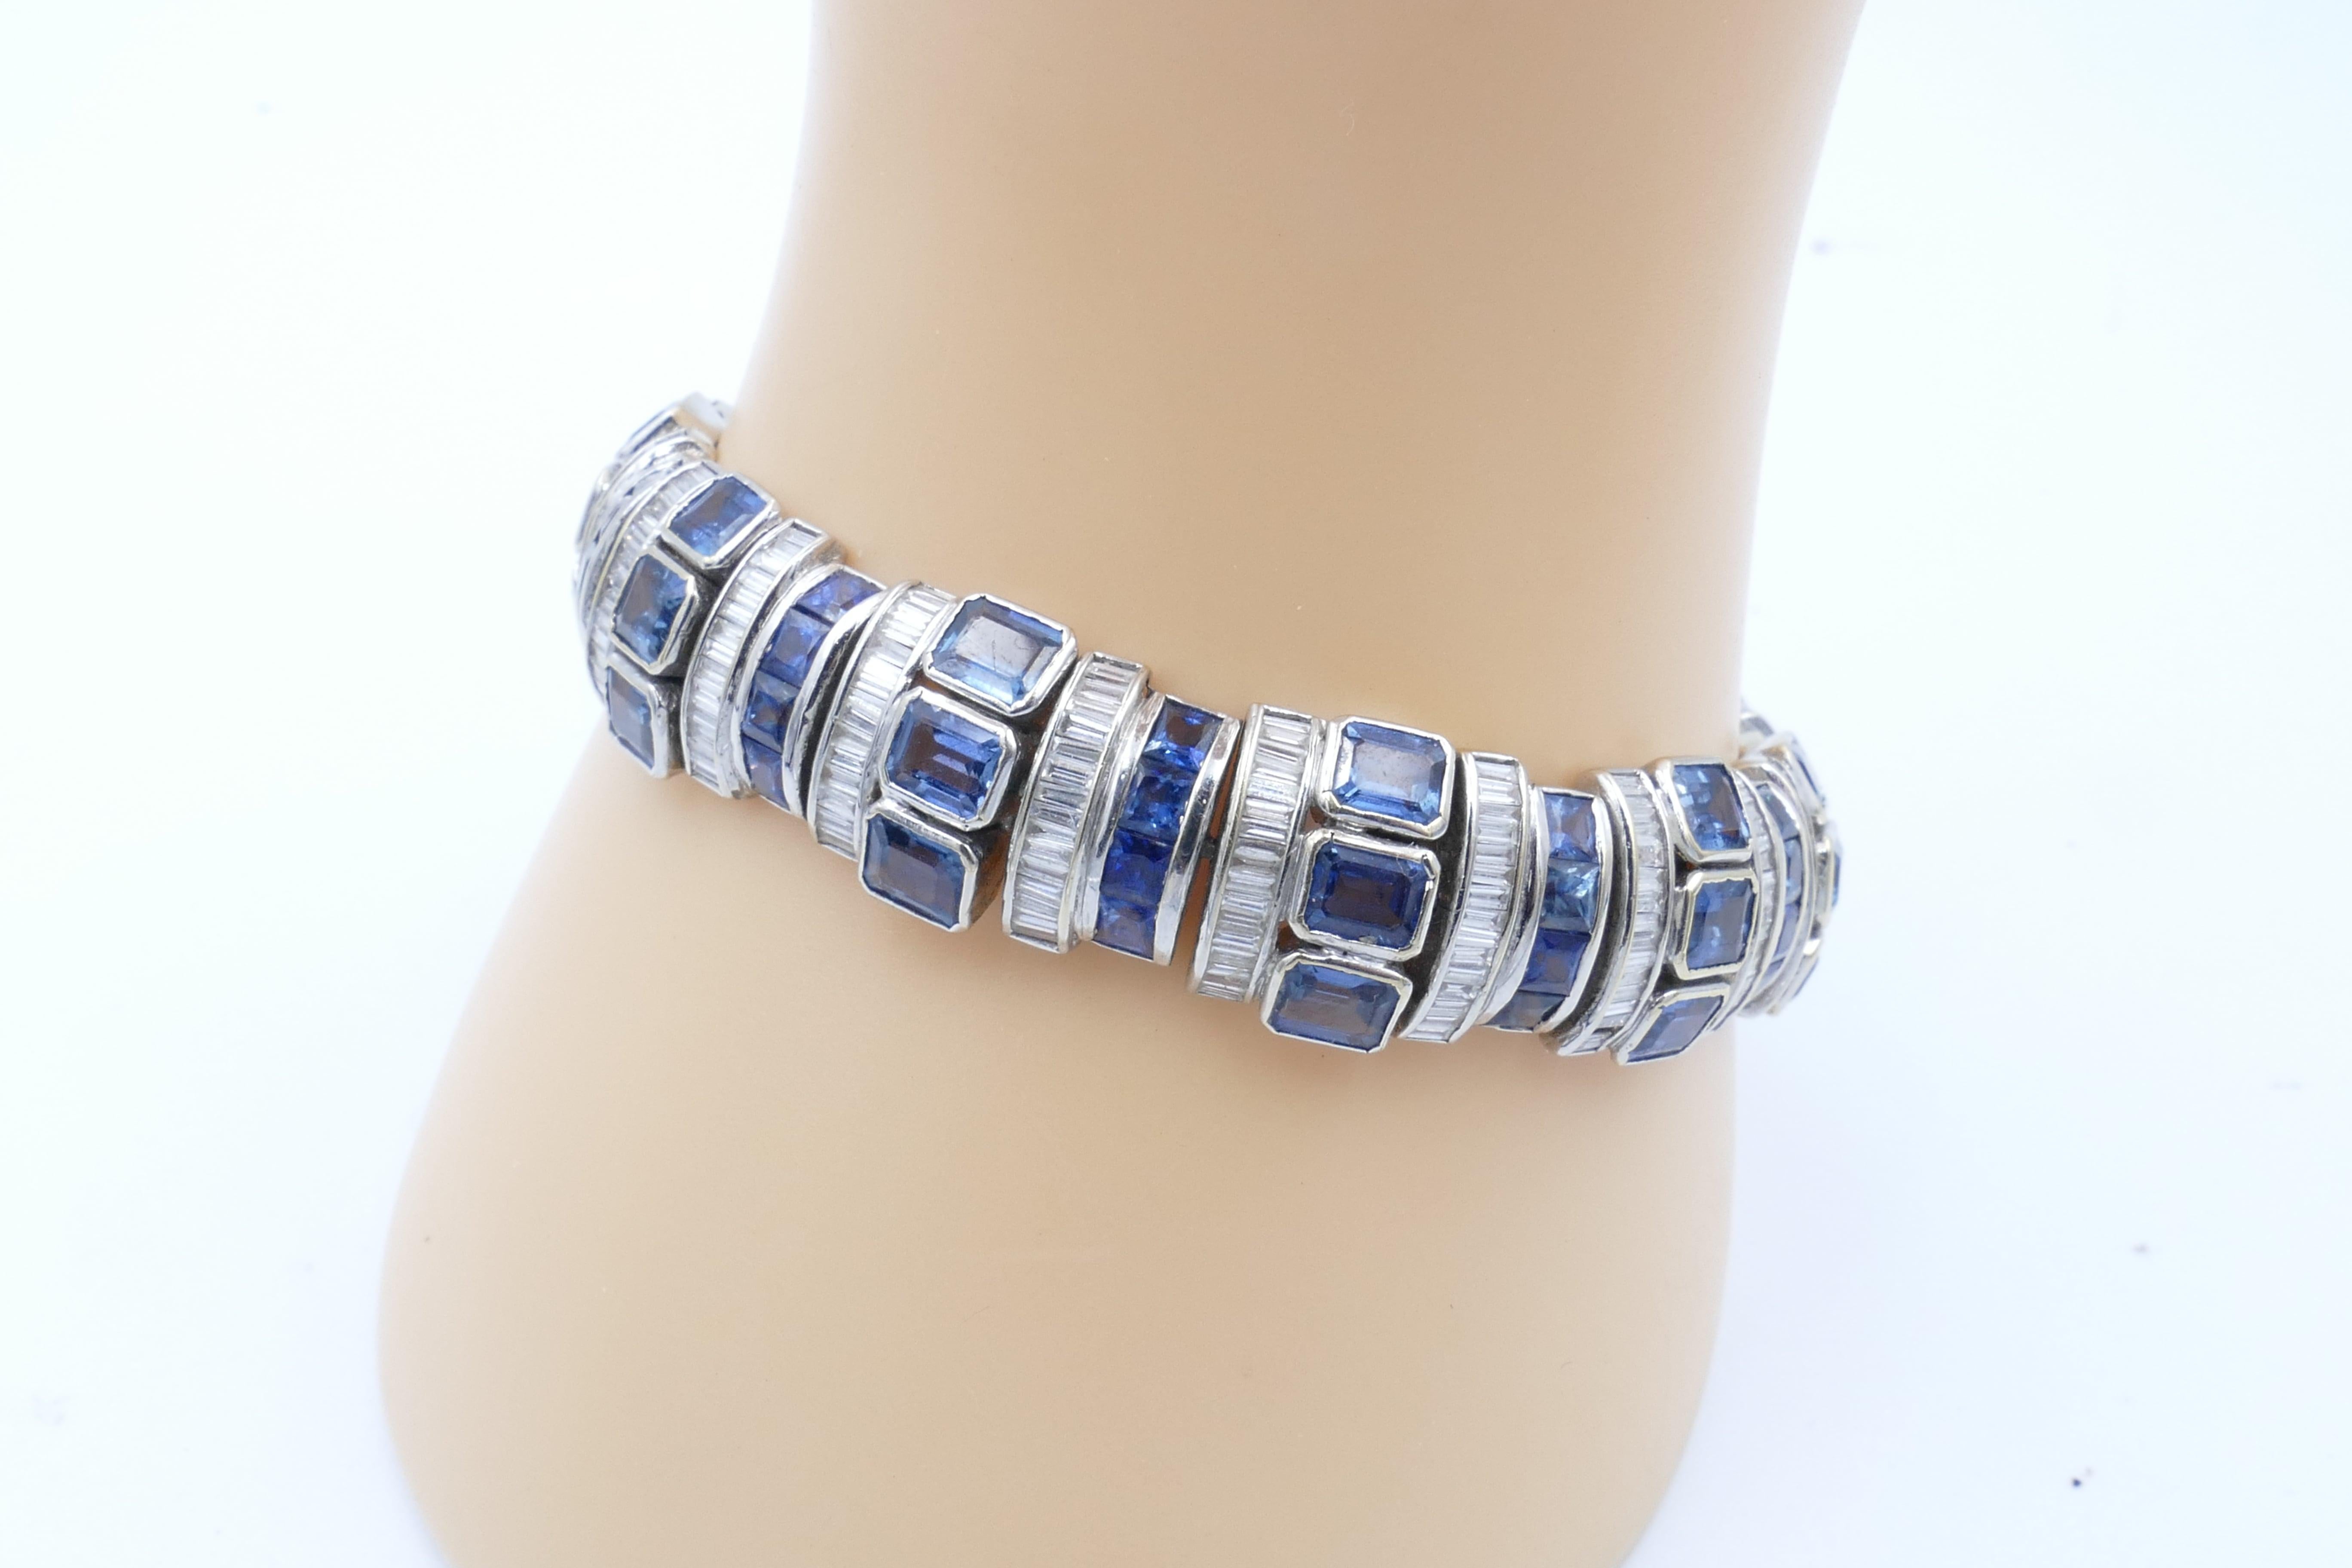 This absolutely stunning hand made Sapphire Bracelet has 33 Emerald Cut Blue Sapphires bezel set with 44 Carre Cut Blue Sapphires Channel Set along with 348 Baguette Cut Diamonds of very high quality Colour being F-G.
The Bracelet measures 18.5cm in